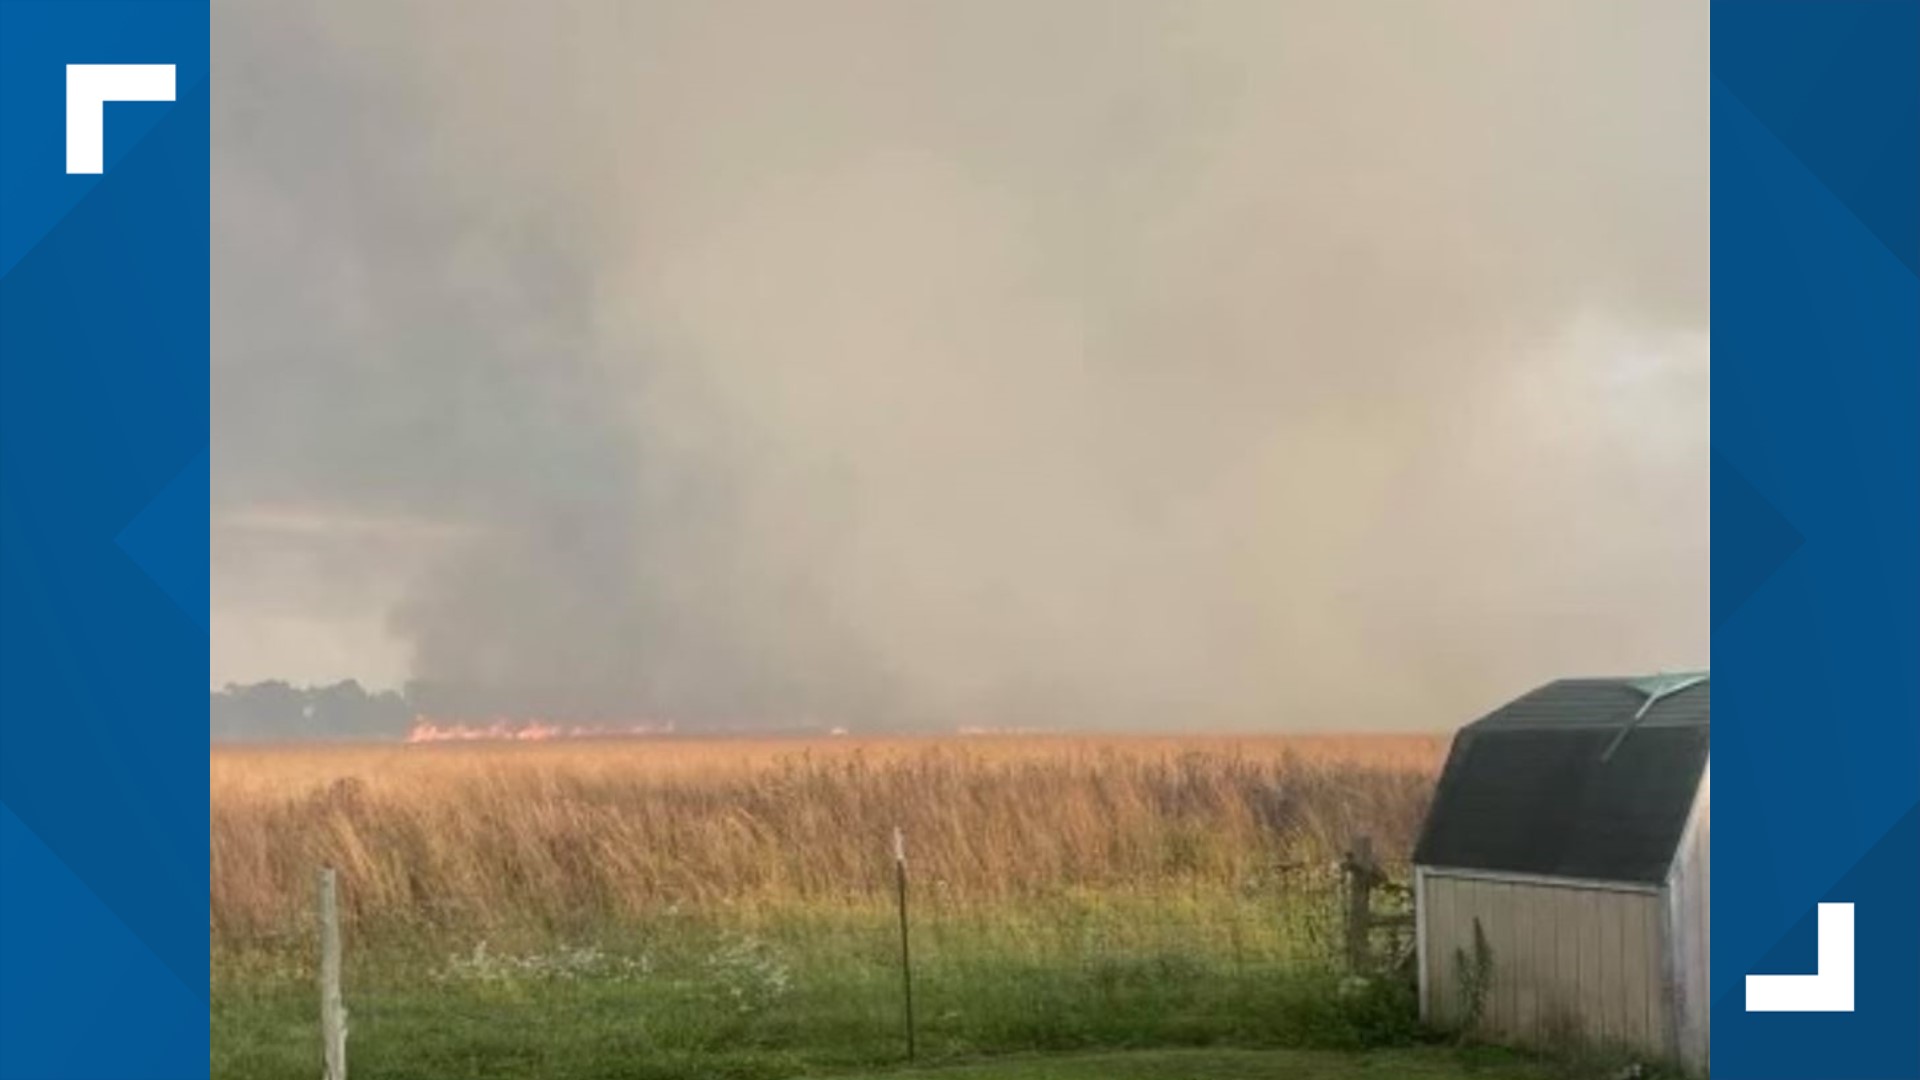 The process is called prescribed burn, and experts say conditions have to be just right in order to make it safe.